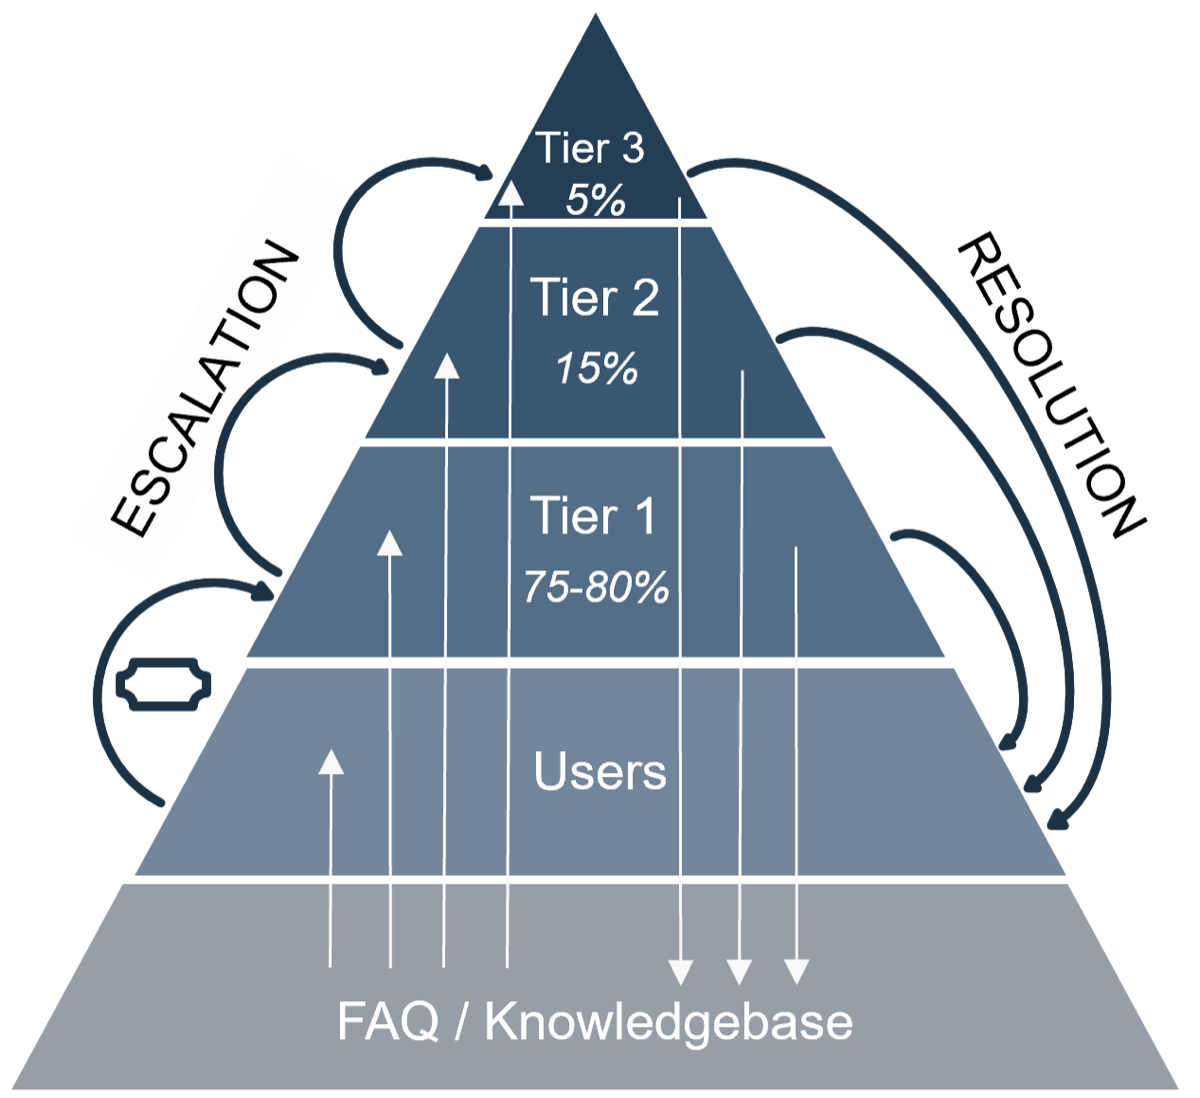 The image is a graphic of a pyramid, with categories as follows (from bottom): FAQ/Knowledgebase; Users; Tier 1-75-80%; Tier 2-15%; Tier 3 - 5%. On the right side of the pyramid is written Resolution, with arrows extending from each of the higher sections down to Users. On the left is written Escalation, with arrows from each lower category up to the next highest. Inside the pyramid are arrows extending from the bottom to each level and vice versa.